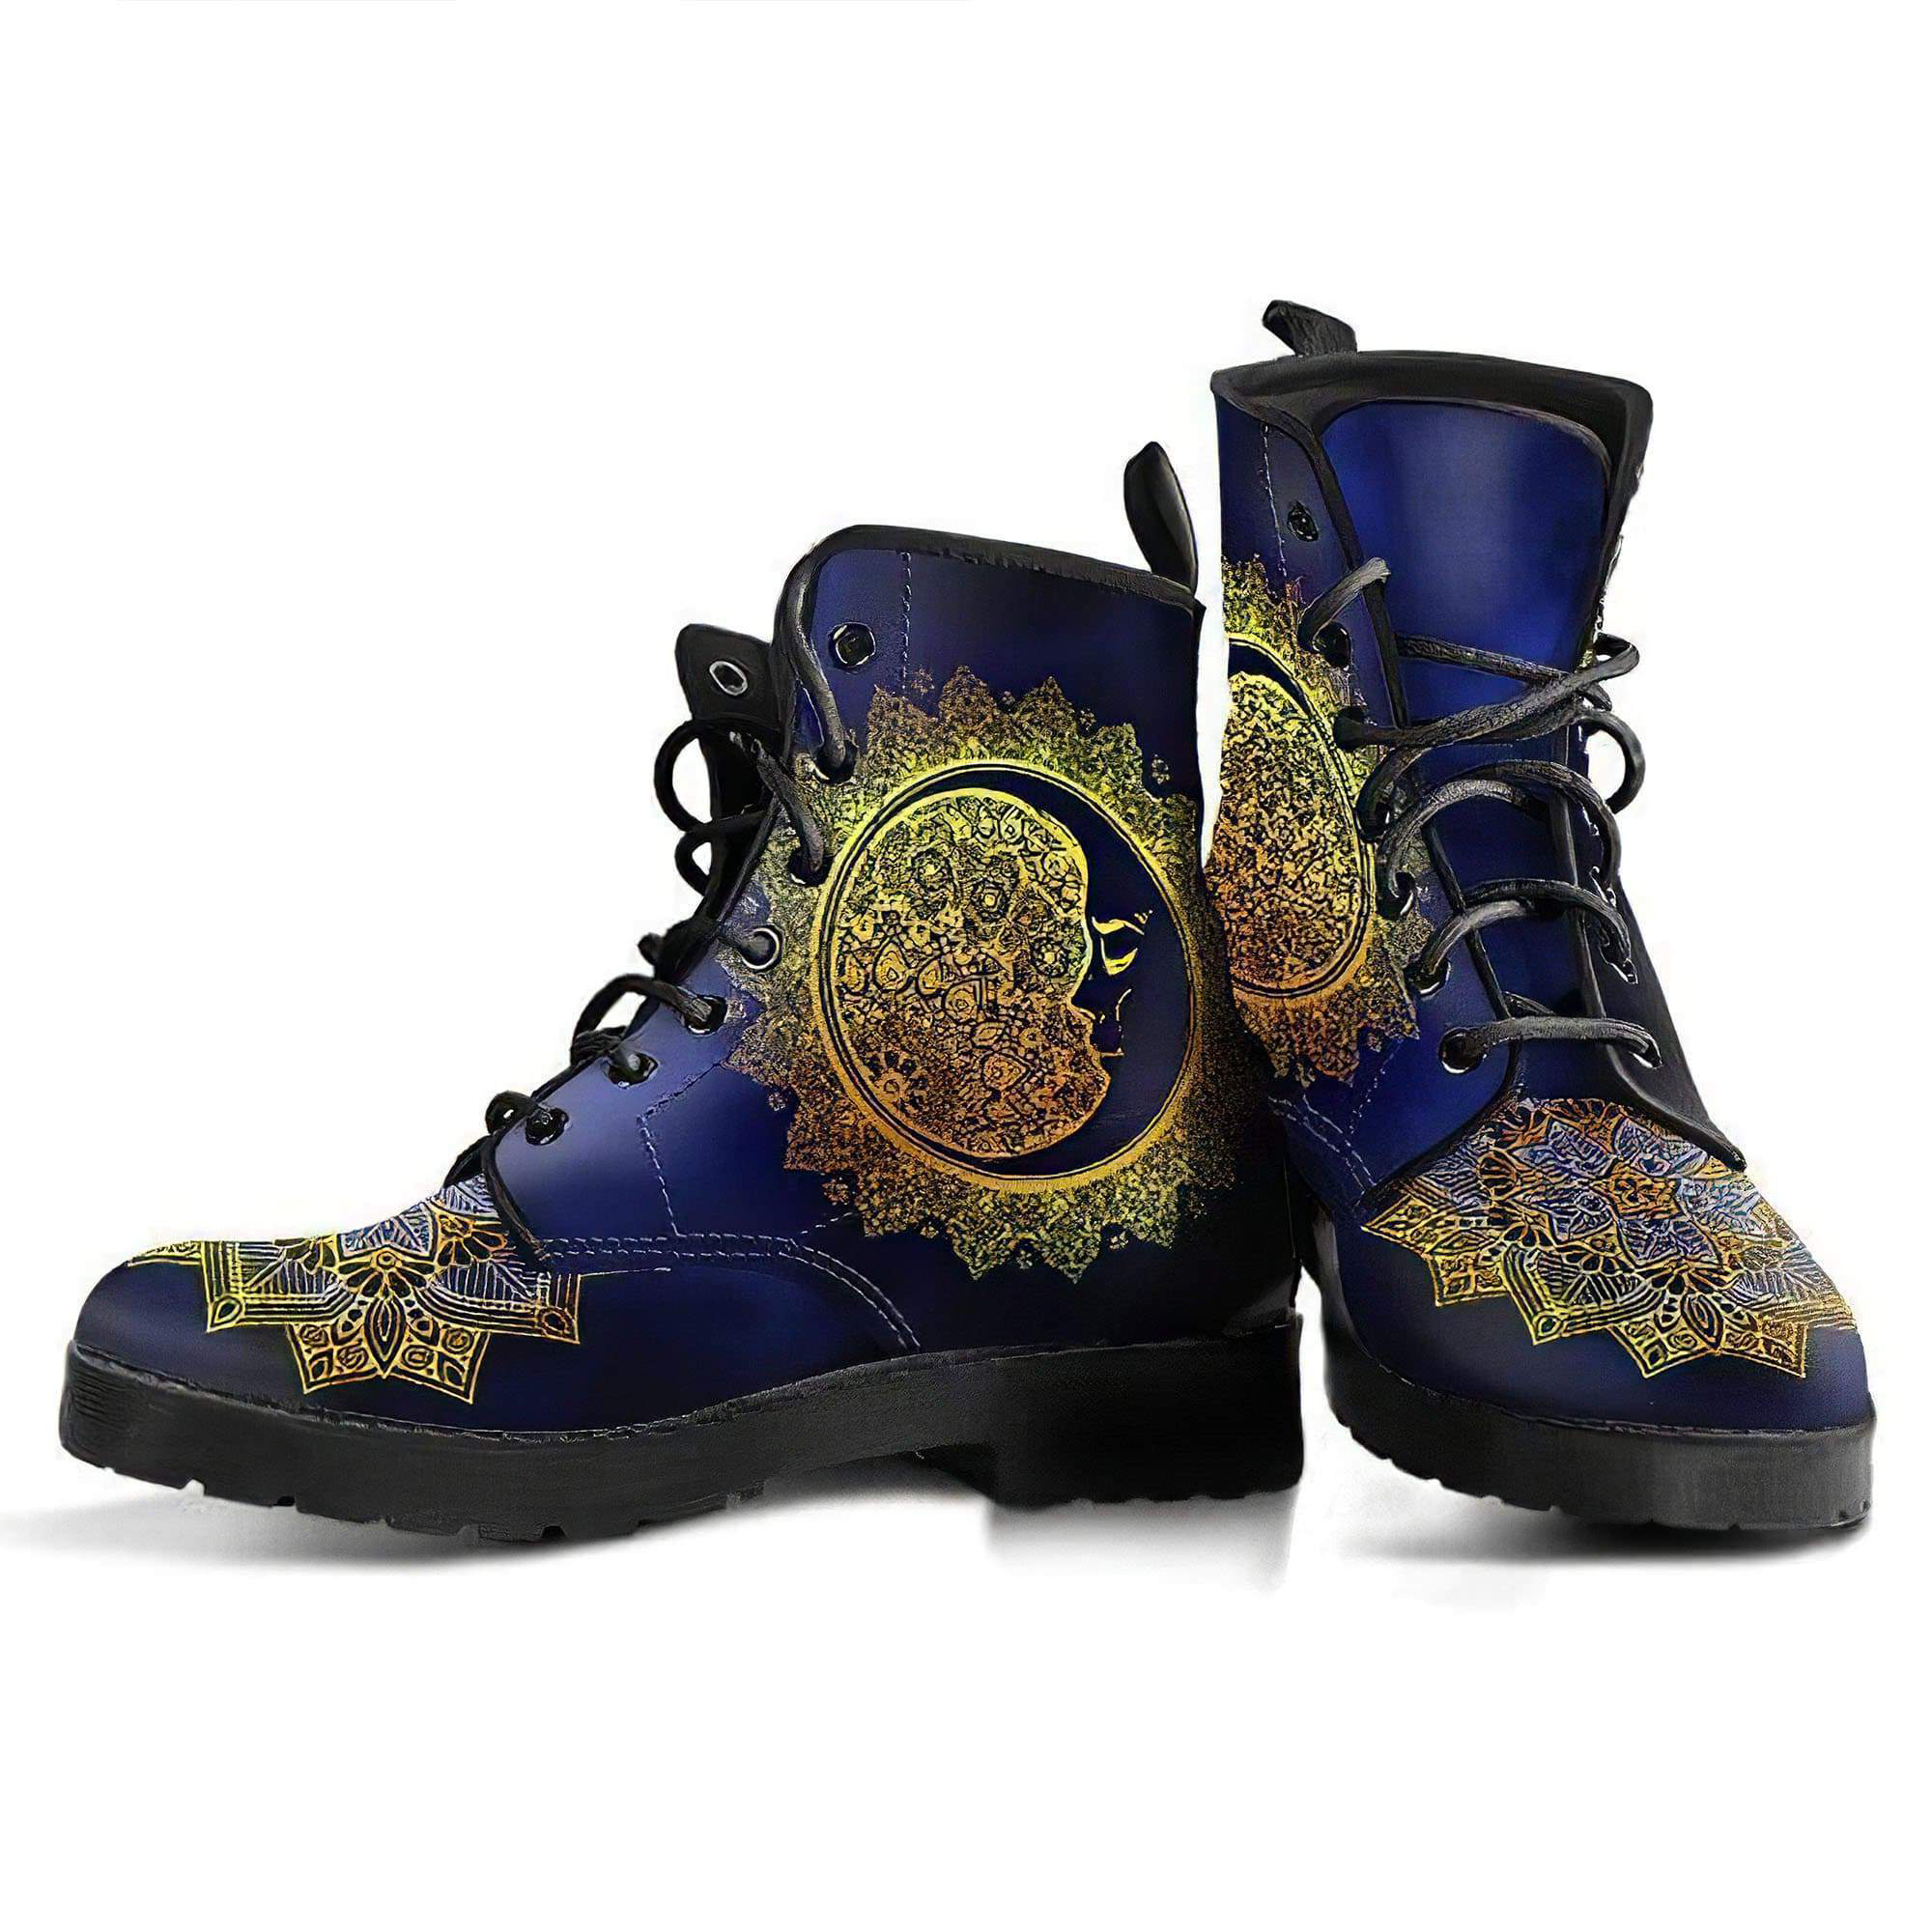 moon-mandala-handcrafted-boots-v2-women-s-leather-boots-12051911671869.jpg